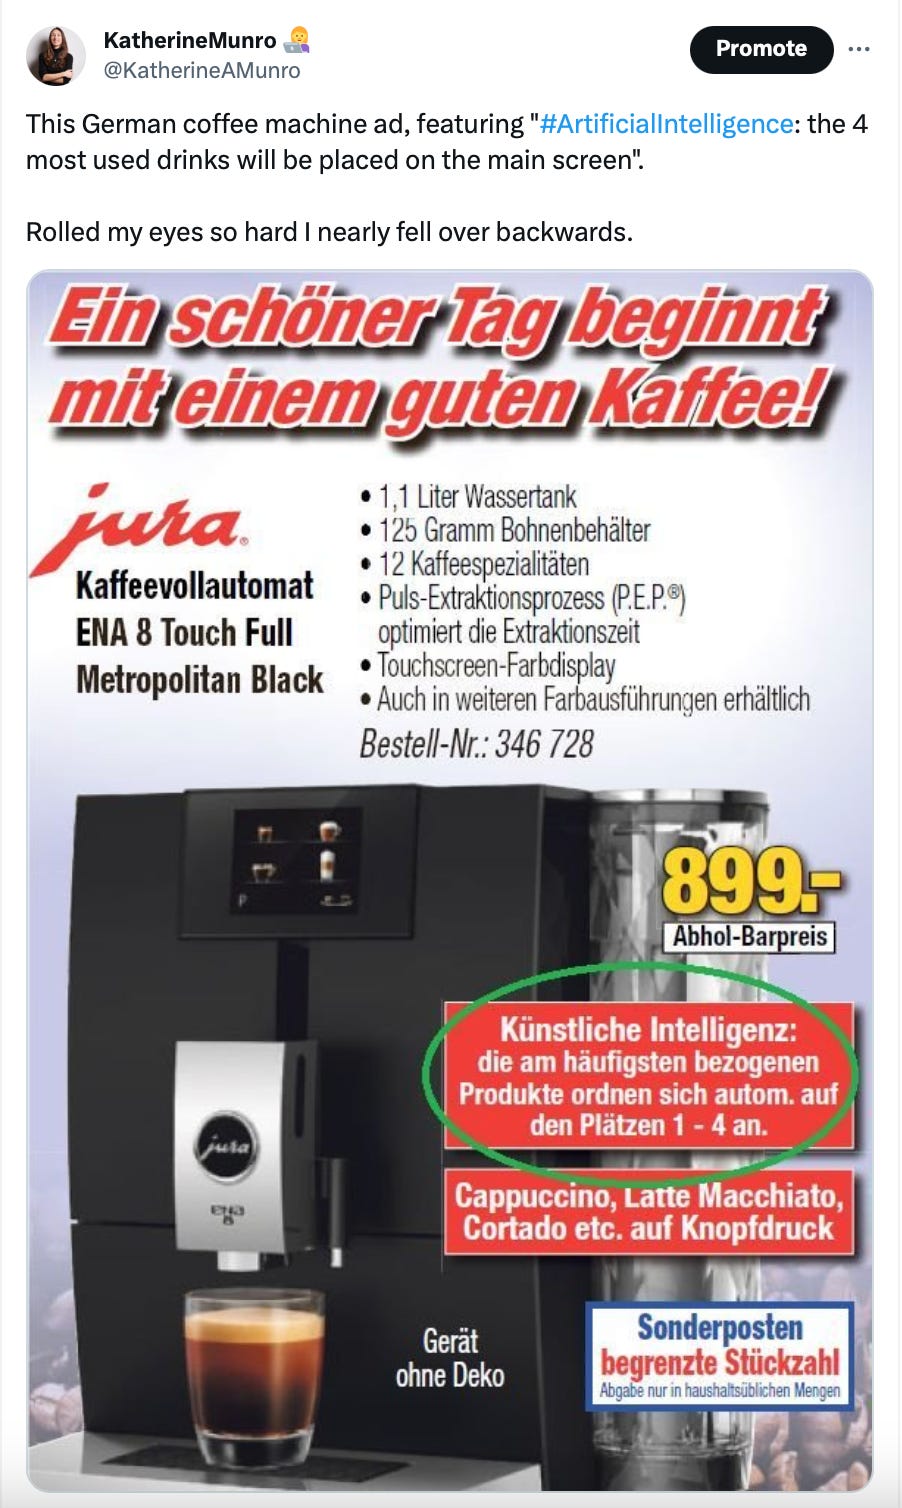 A German advertisement for a coffee machine. Translated to English, one highlighted part of the advertisement reads "AI: the most frequently requested drinks will be displayed in positions 1-4."